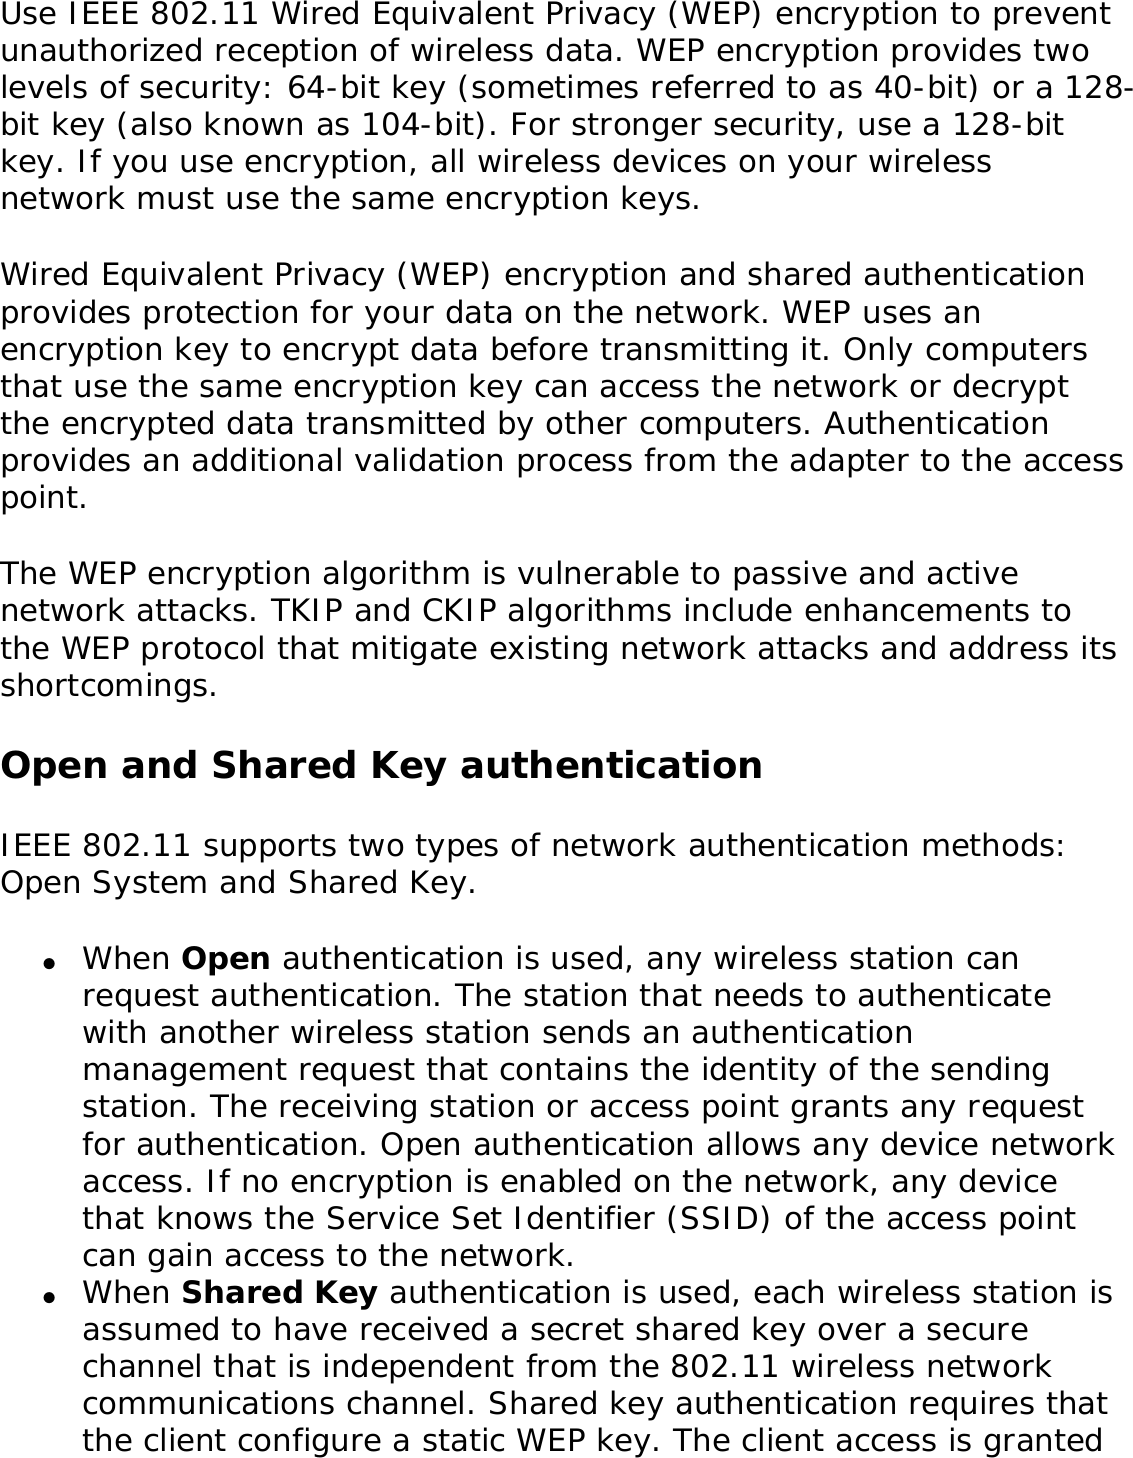 Use IEEE 802.11 Wired Equivalent Privacy (WEP) encryption to prevent unauthorized reception of wireless data. WEP encryption provides two levels of security: 64-bit key (sometimes referred to as 40-bit) or a 128-bit key (also known as 104-bit). For stronger security, use a 128-bit key. If you use encryption, all wireless devices on your wireless network must use the same encryption keys. Wired Equivalent Privacy (WEP) encryption and shared authentication provides protection for your data on the network. WEP uses an encryption key to encrypt data before transmitting it. Only computers that use the same encryption key can access the network or decrypt the encrypted data transmitted by other computers. Authentication provides an additional validation process from the adapter to the access point. The WEP encryption algorithm is vulnerable to passive and active network attacks. TKIP and CKIP algorithms include enhancements to the WEP protocol that mitigate existing network attacks and address its shortcomings. Open and Shared Key authenticationIEEE 802.11 supports two types of network authentication methods: Open System and Shared Key. ●     When Open authentication is used, any wireless station can request authentication. The station that needs to authenticate with another wireless station sends an authentication management request that contains the identity of the sending station. The receiving station or access point grants any request for authentication. Open authentication allows any device network access. If no encryption is enabled on the network, any device that knows the Service Set Identifier (SSID) of the access point can gain access to the network. ●     When Shared Key authentication is used, each wireless station is assumed to have received a secret shared key over a secure channel that is independent from the 802.11 wireless network communications channel. Shared key authentication requires that the client configure a static WEP key. The client access is granted 